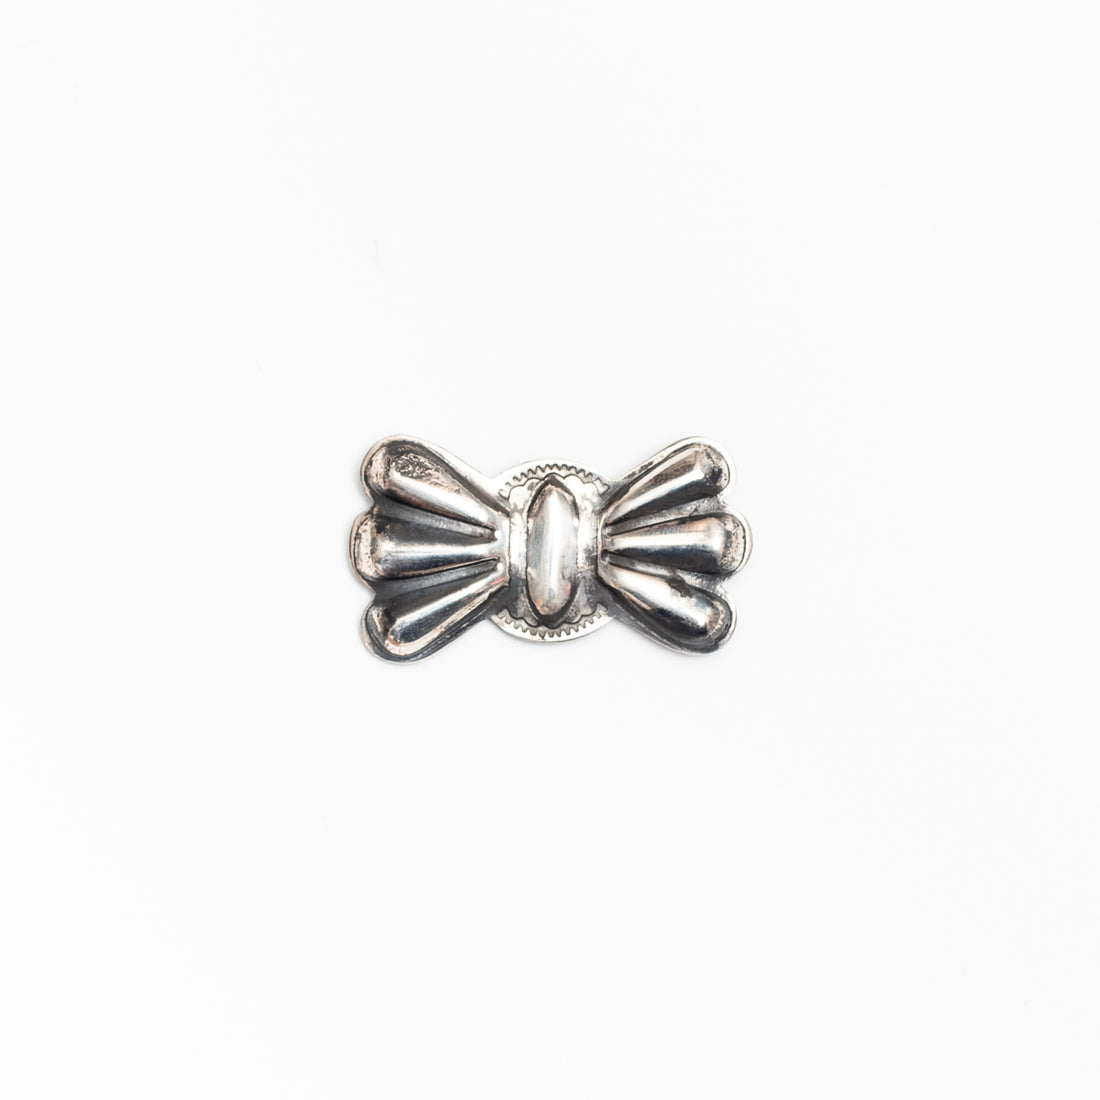 Red Rabbit Trading Co. Butterfly Pin (2)